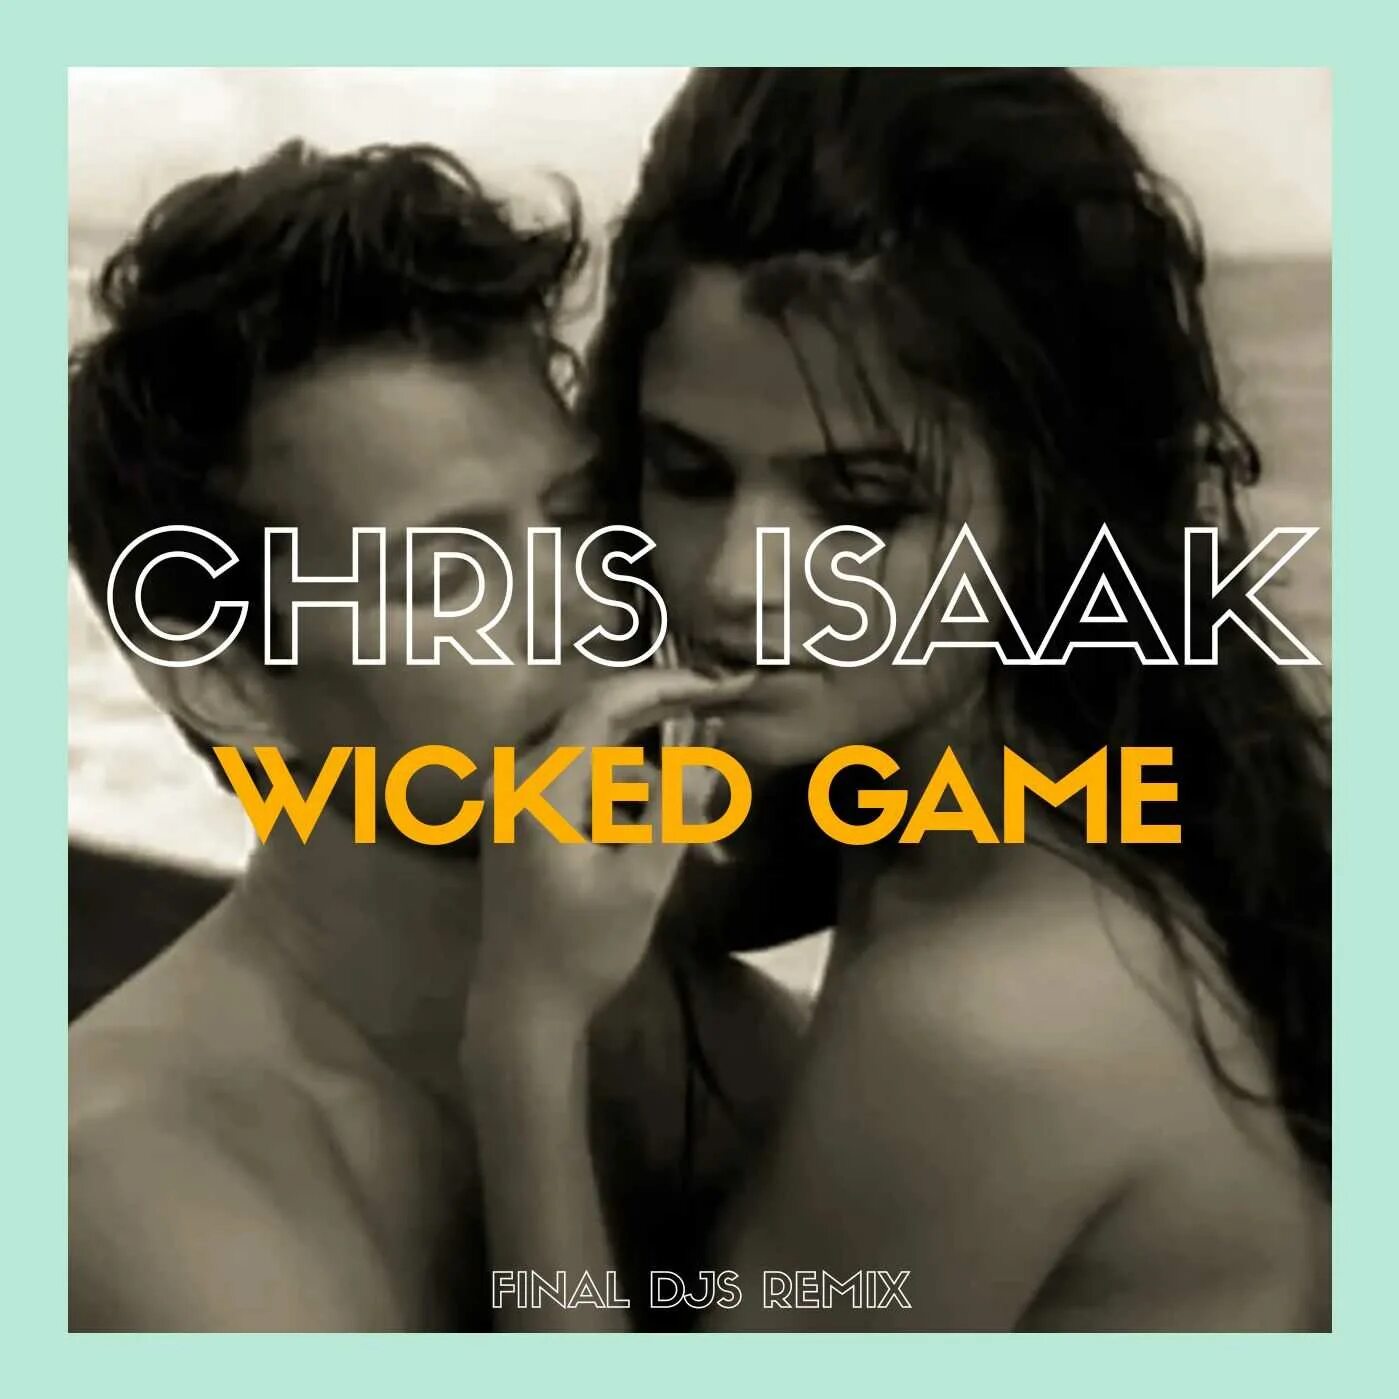 Wicked game mix. Chris Isaak Wicked game. Chris Isaak Wicked game фото.